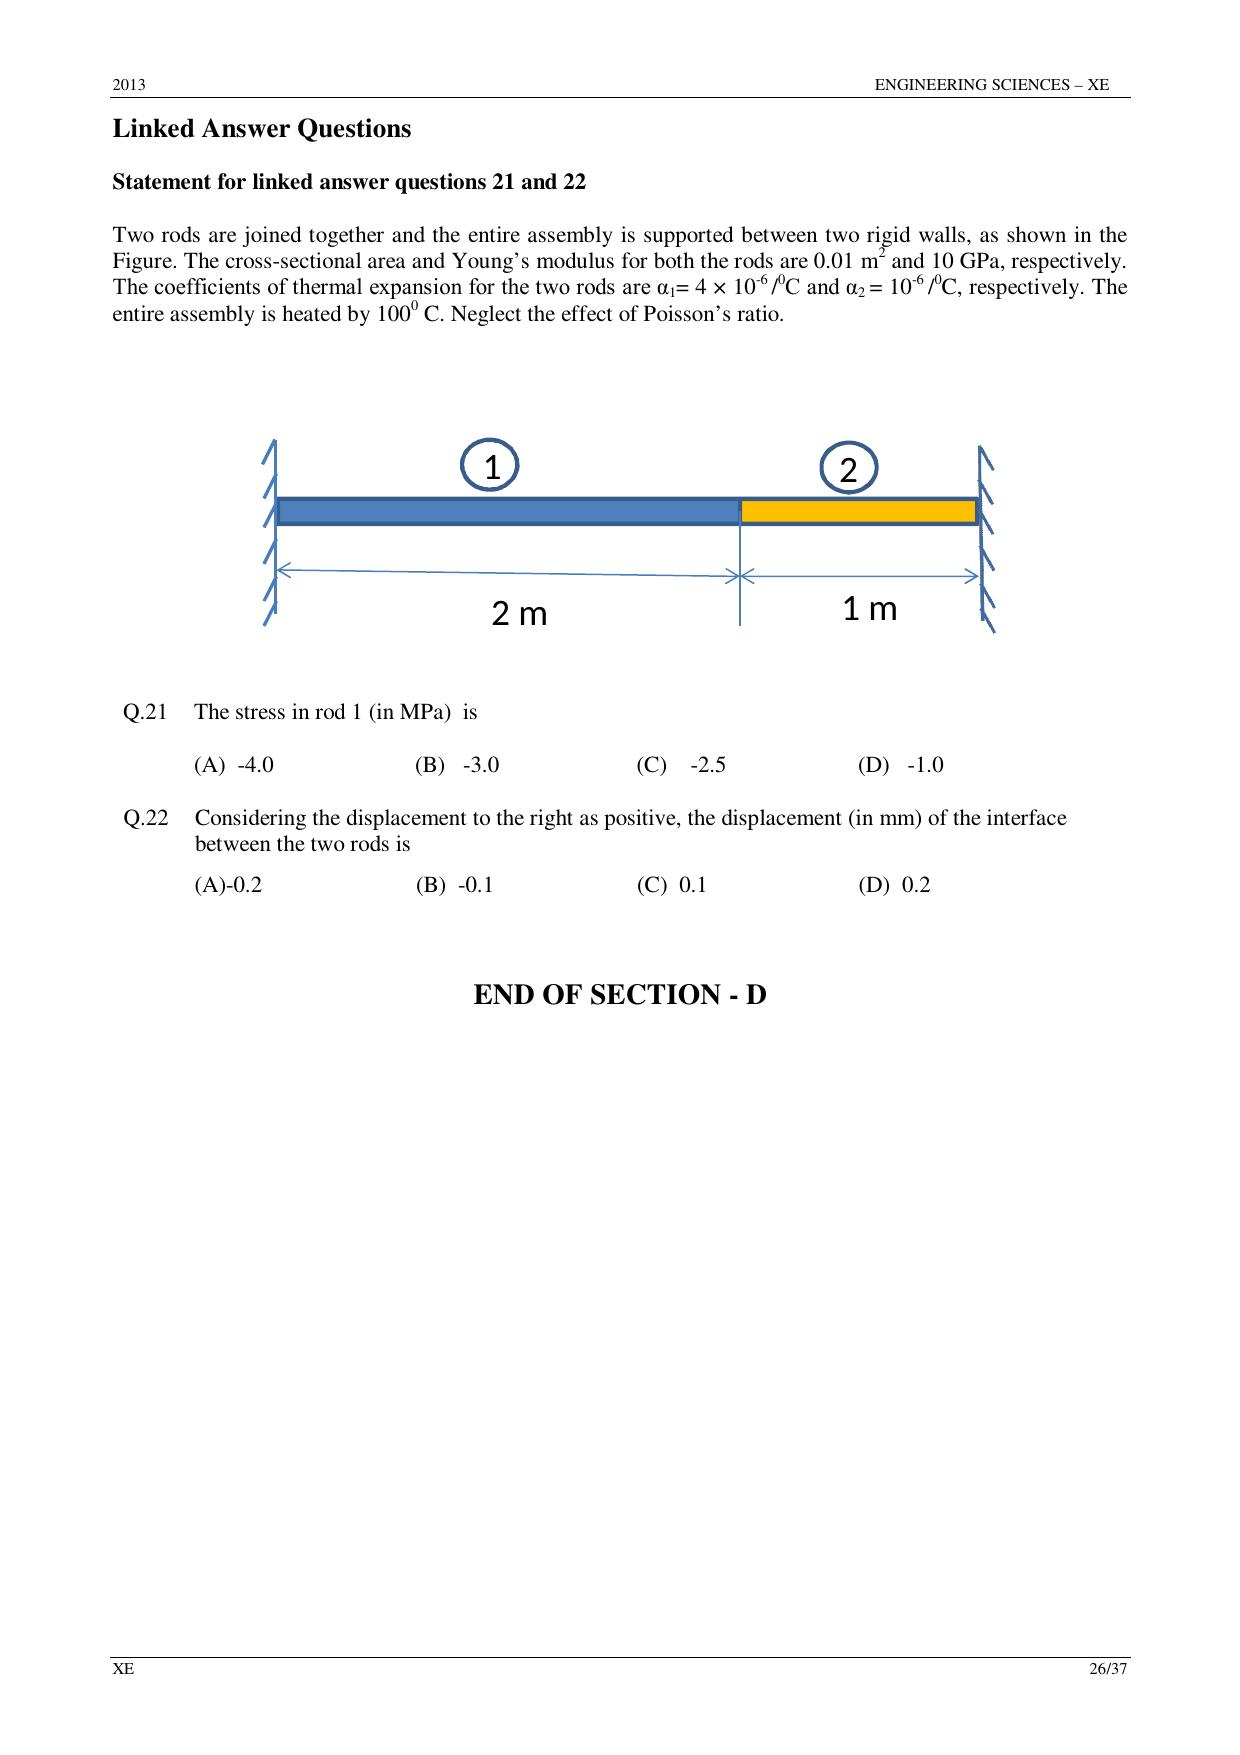 GATE 2013 Engineering Sciences (XE) Question Paper with Answer Key - Page 26